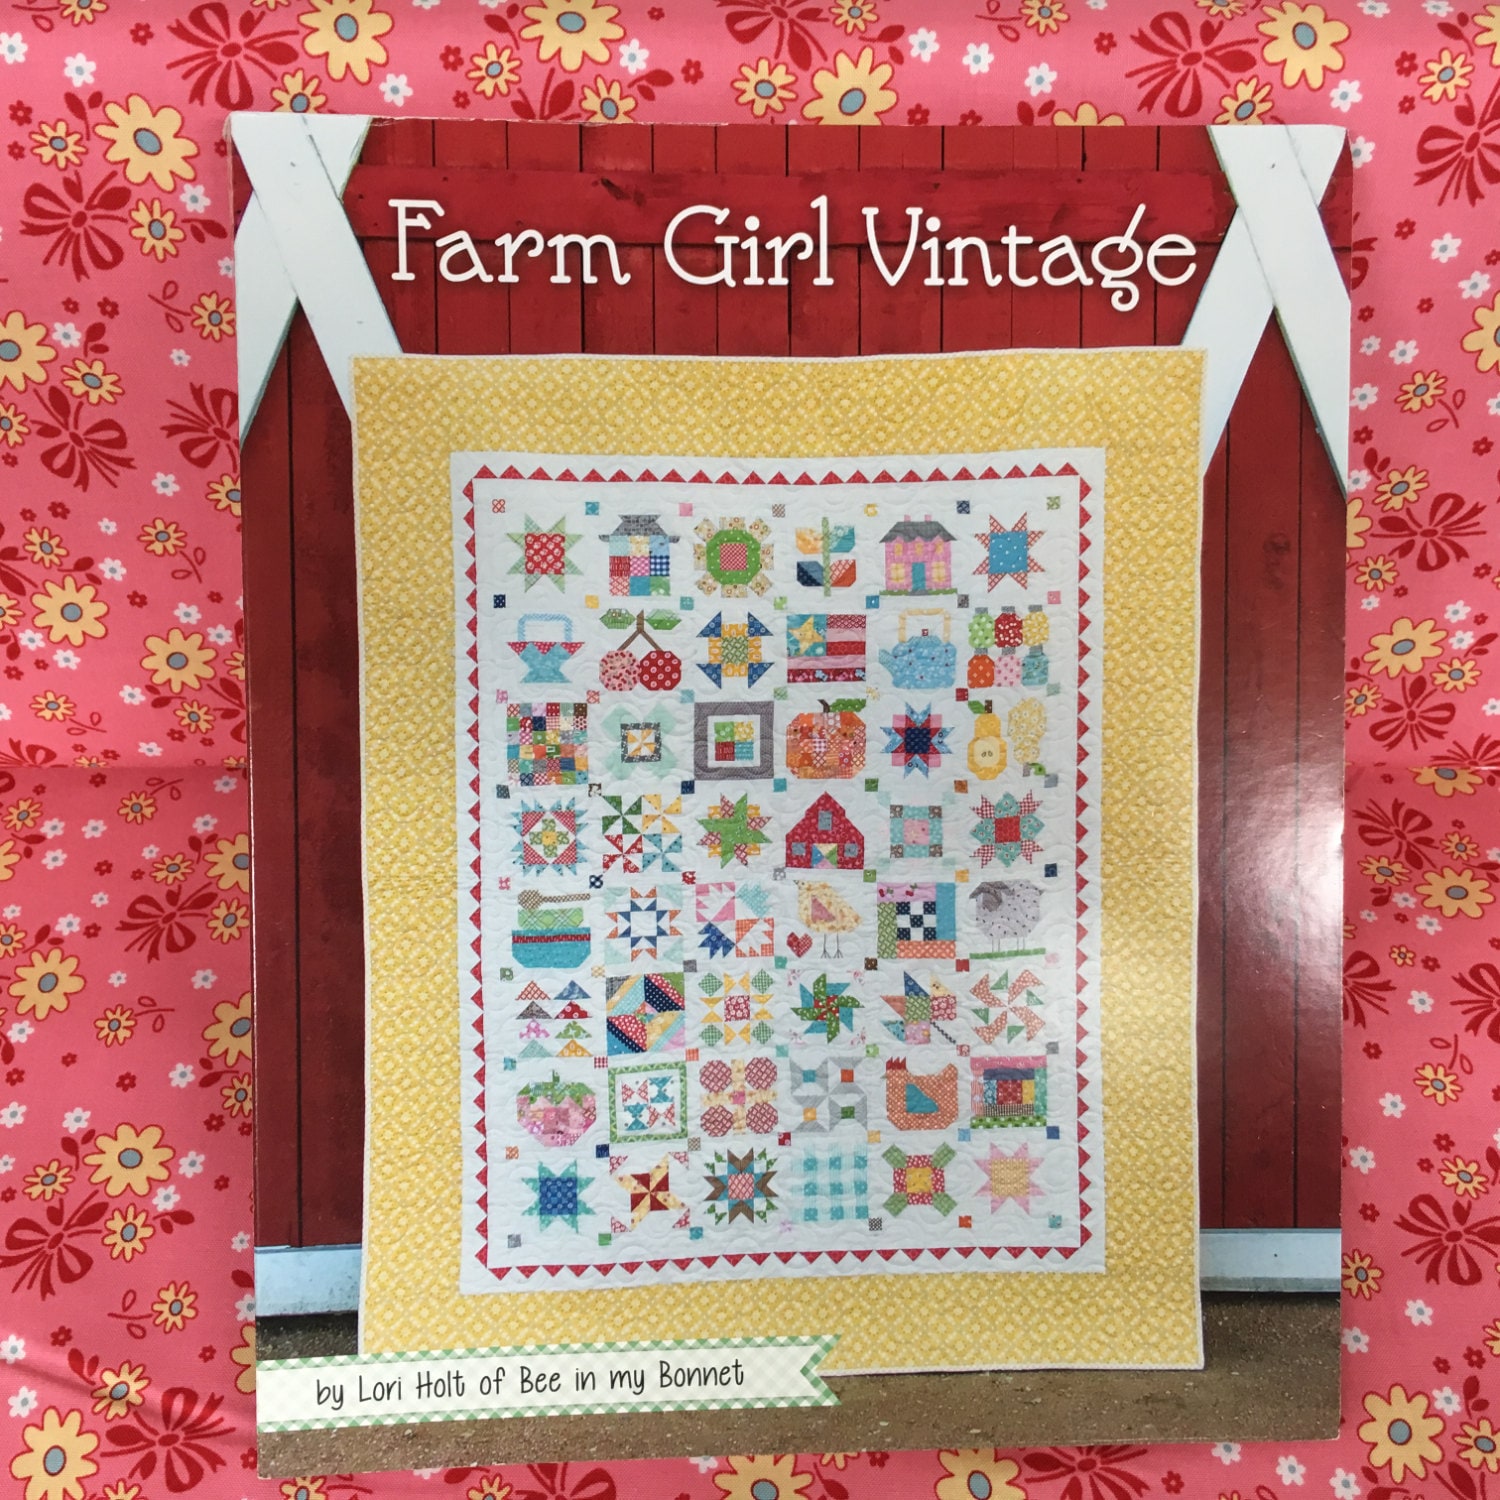 Book Farm Girl Vintage By Lori Holt Of Bee In My Bonnet